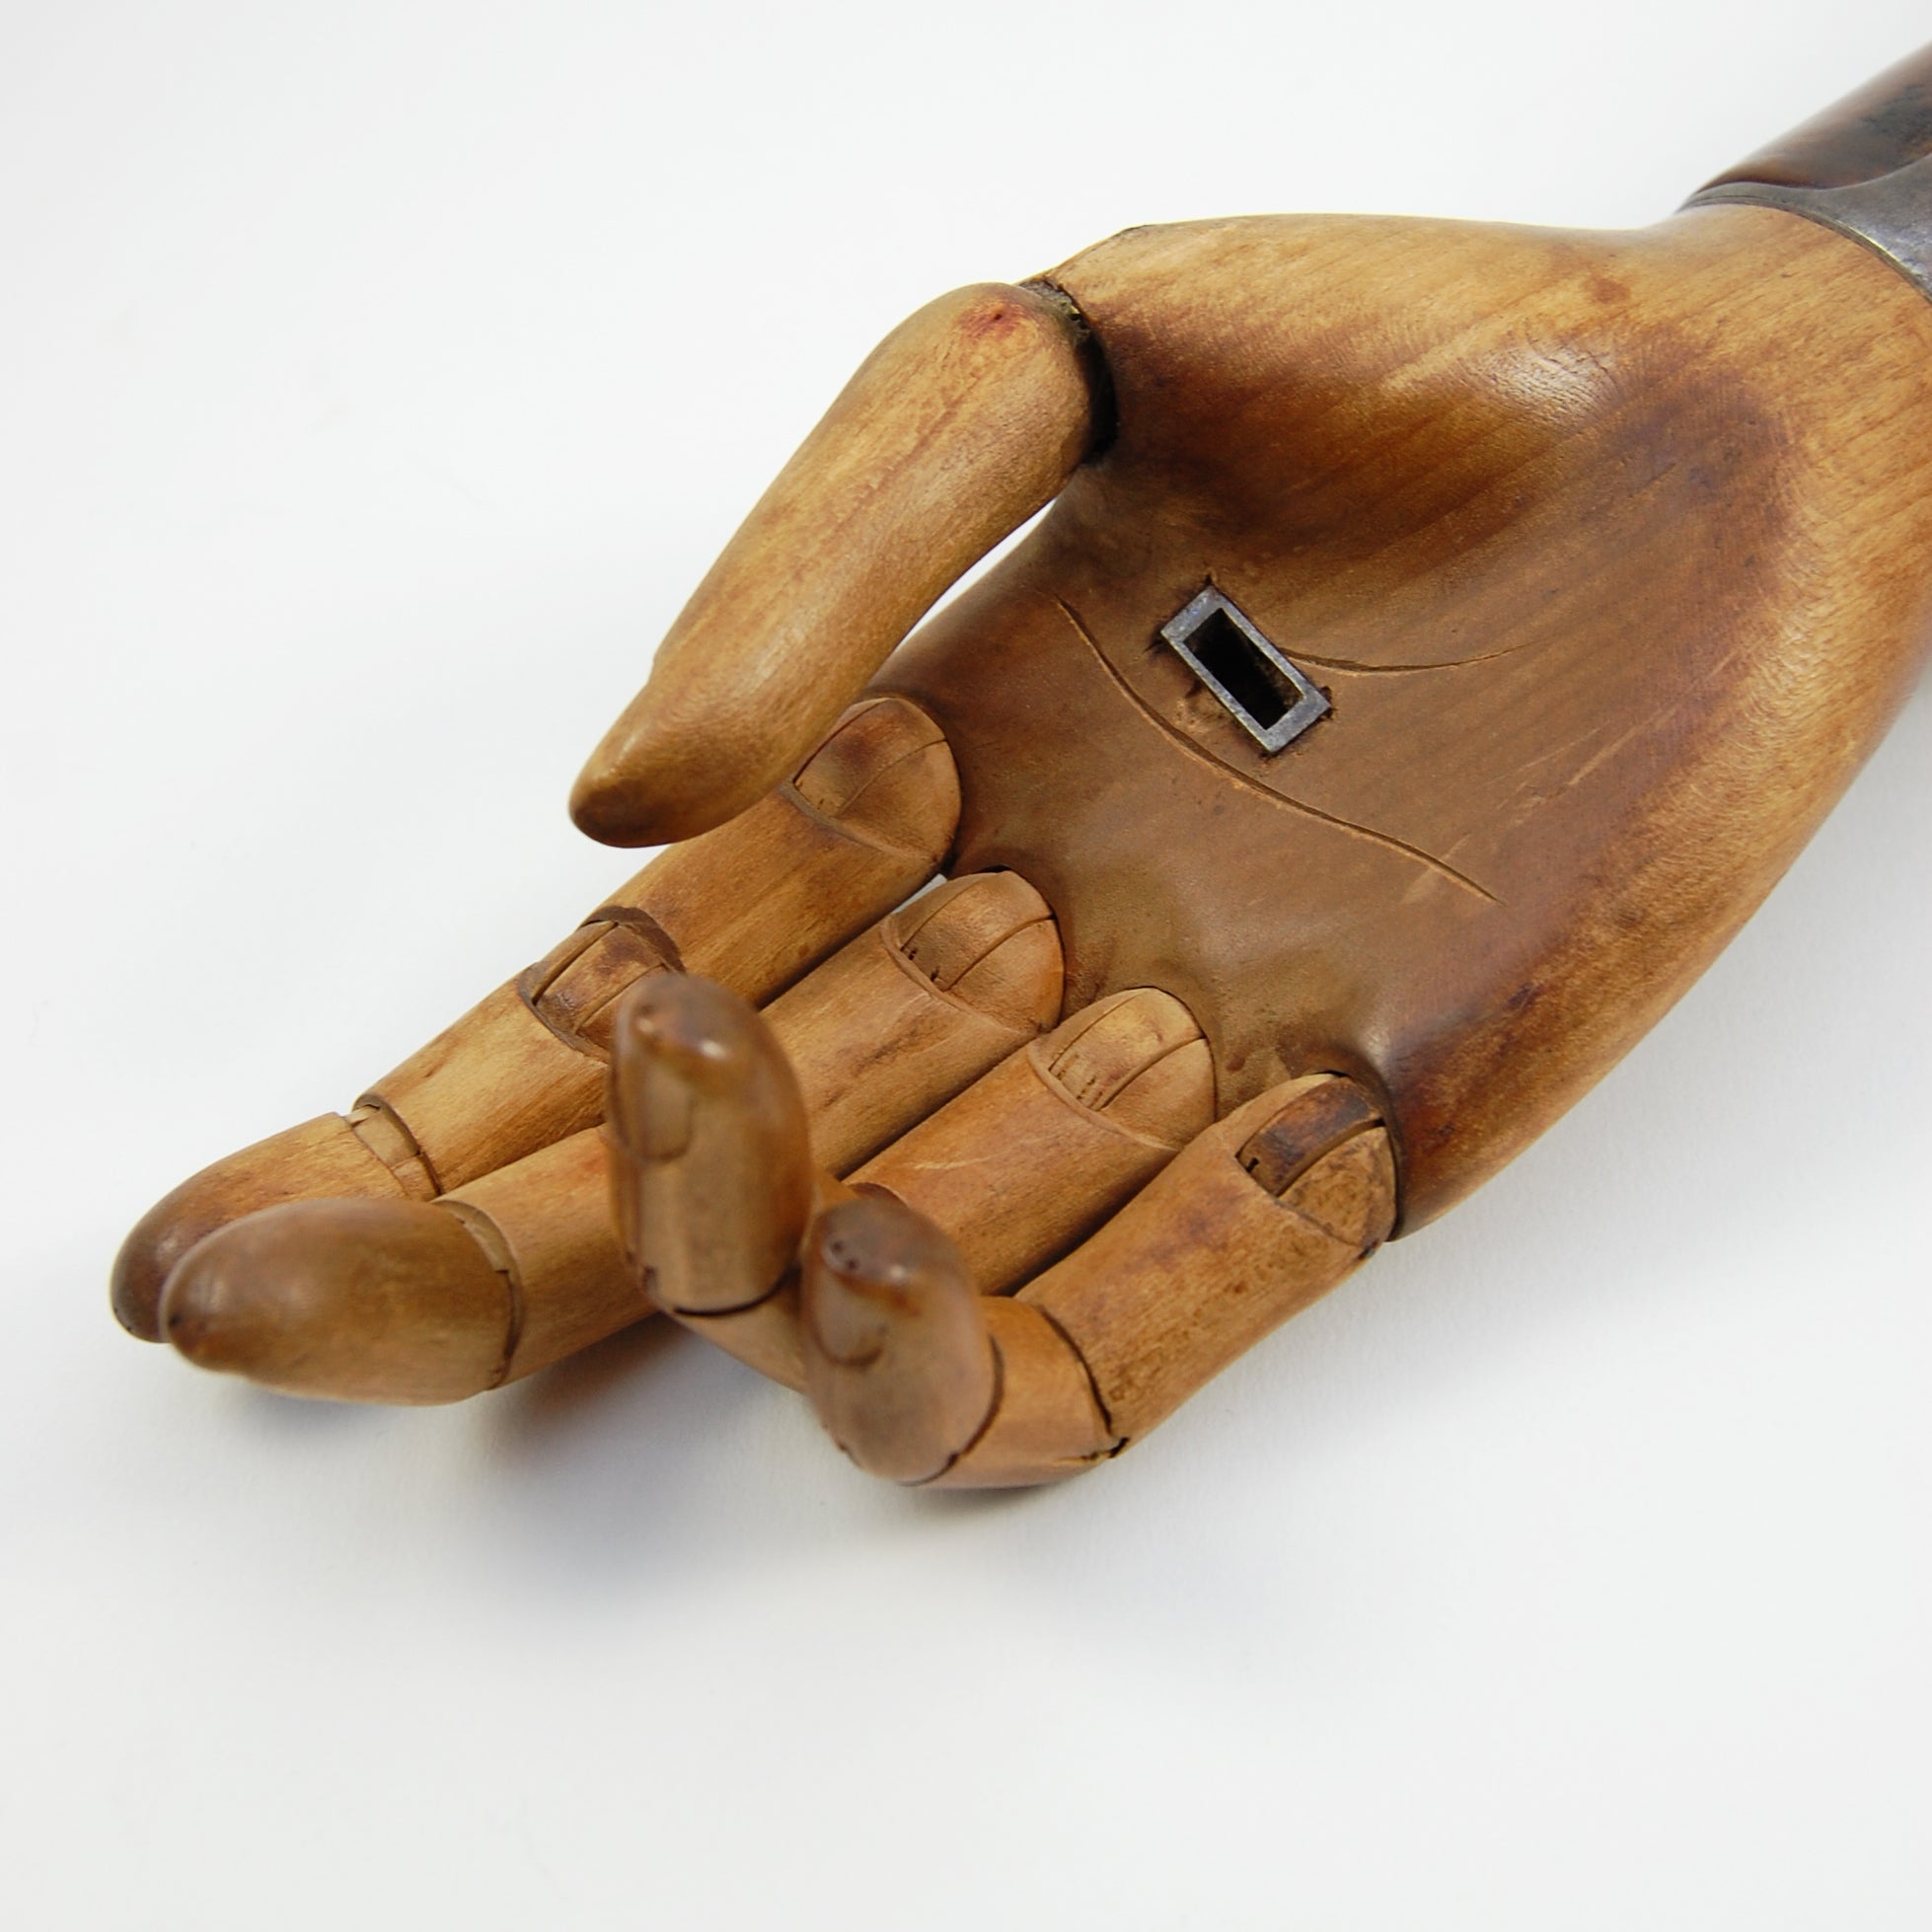 A Rare Victorian Prosthetic Hand by J. Gillingham & Son - Alembic